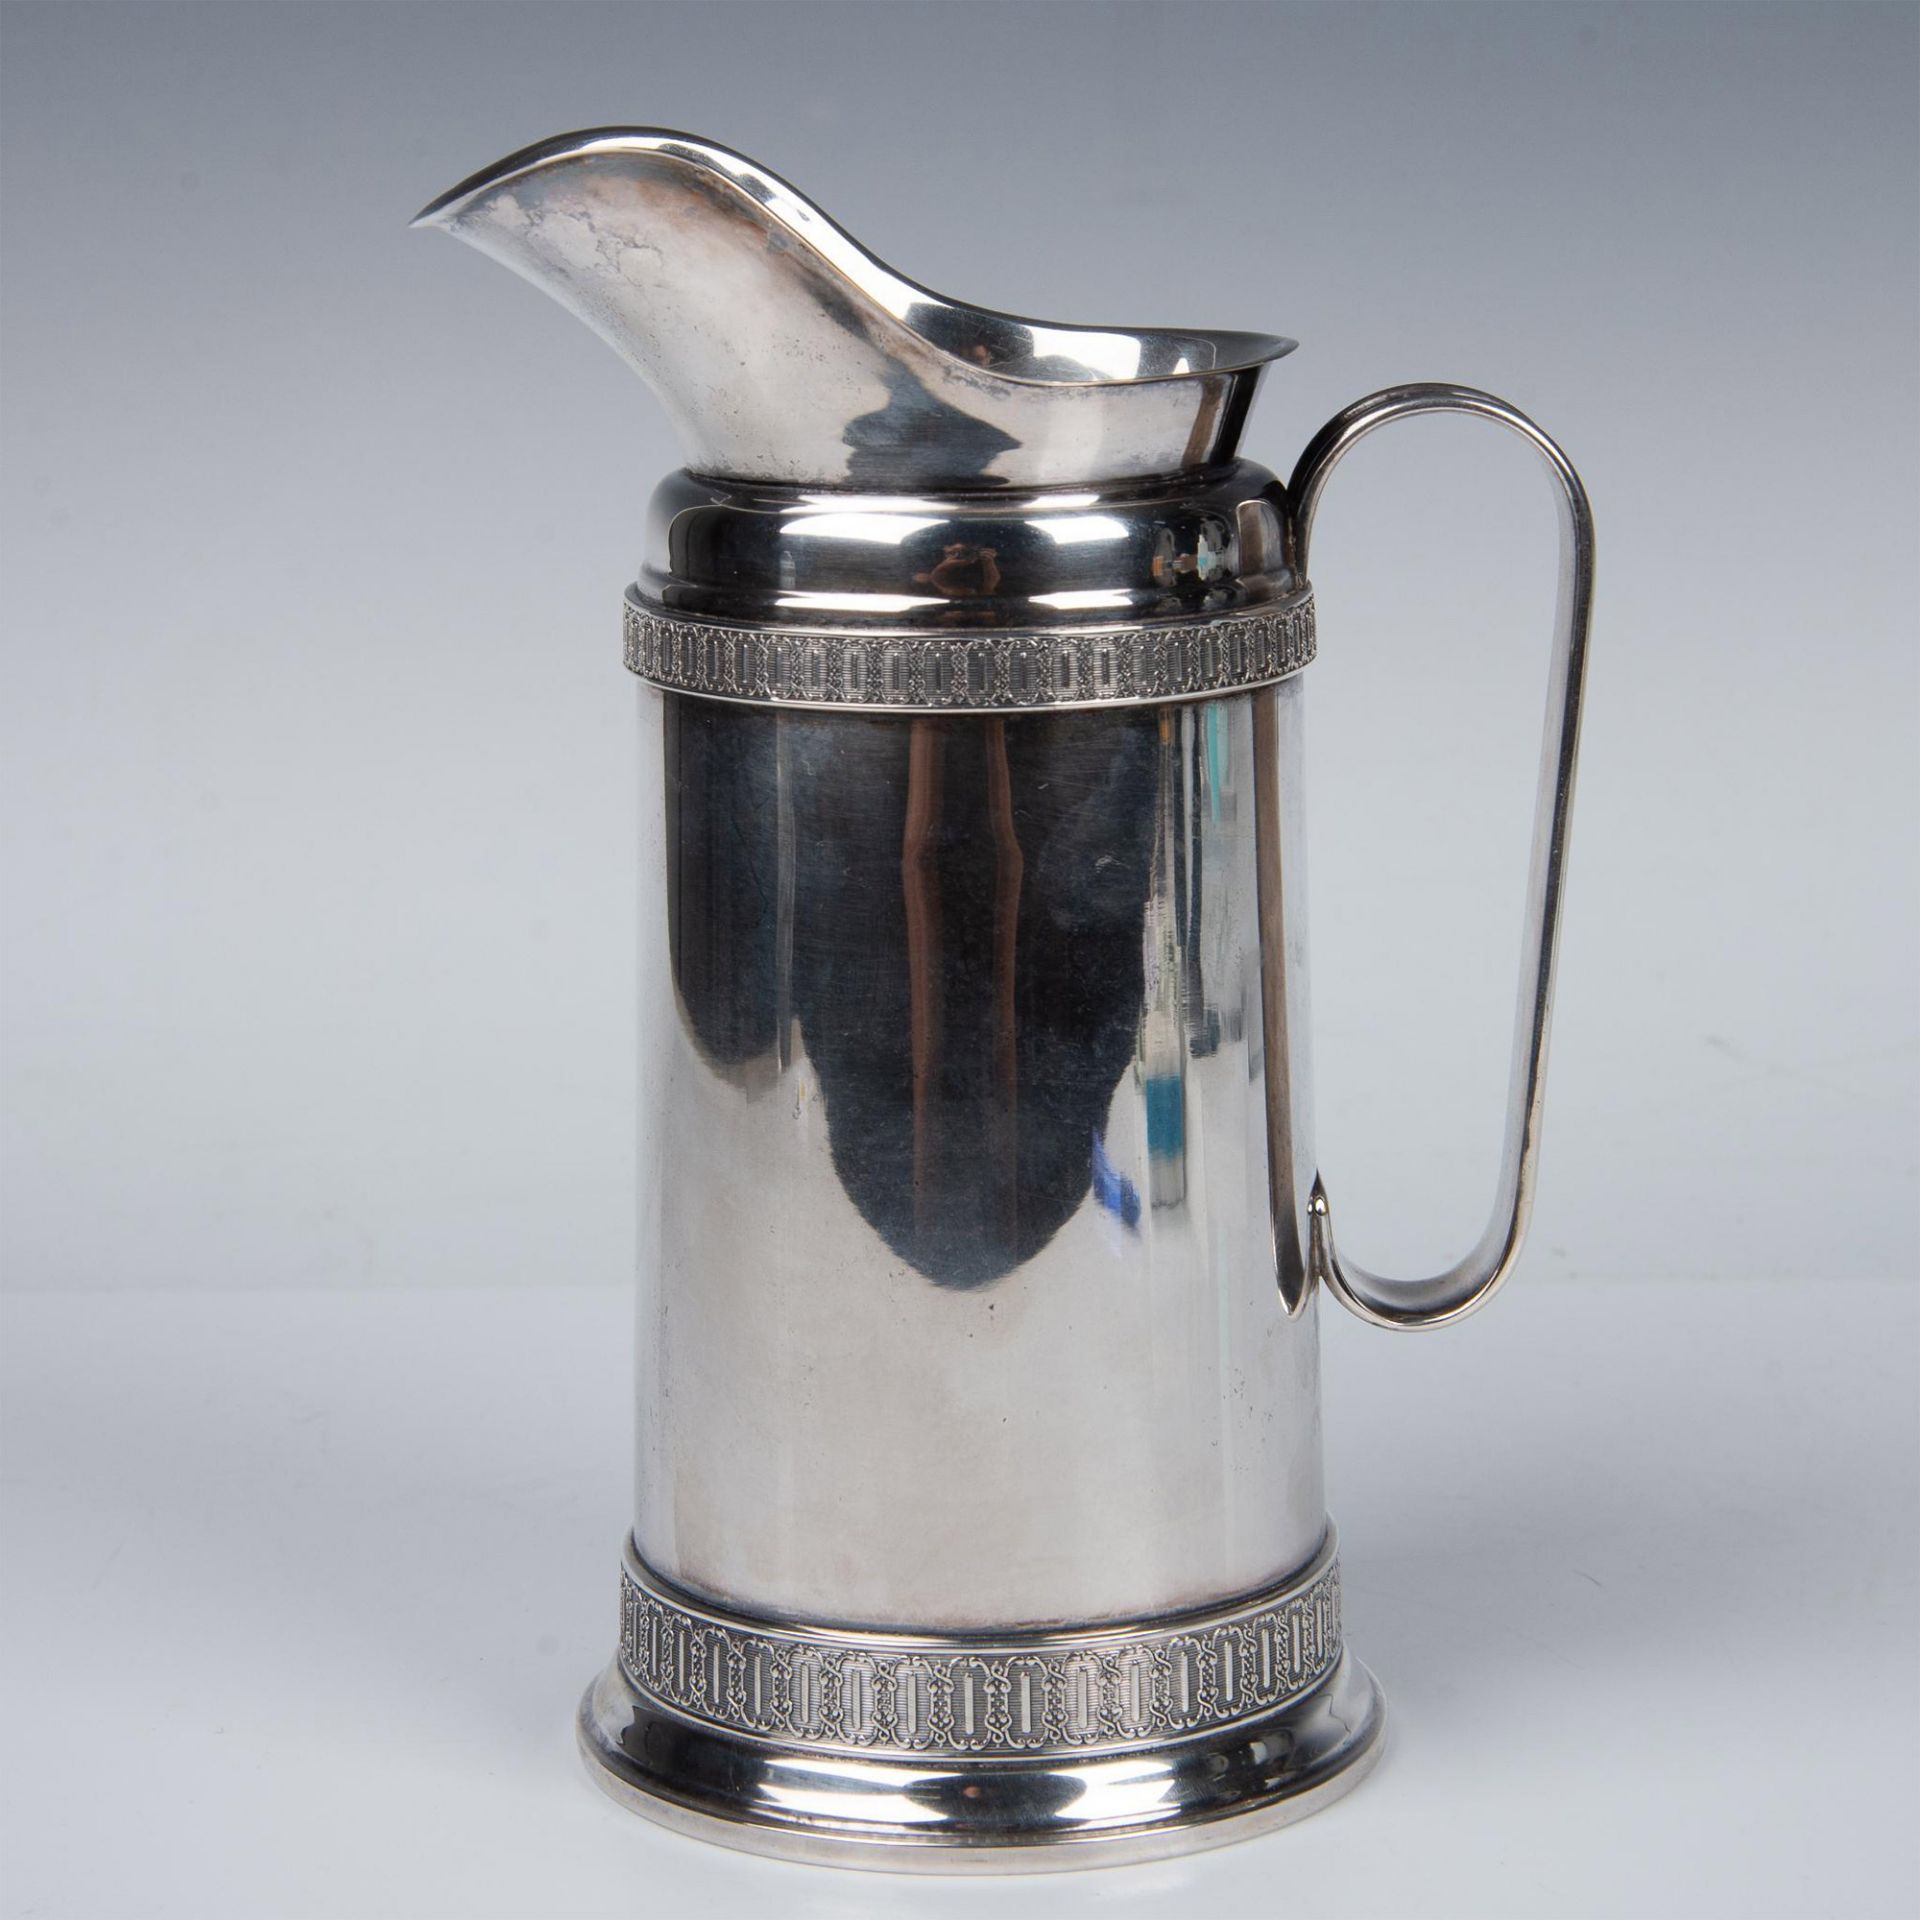 Buccellati Italy Silverplate Pitcher - Image 3 of 6